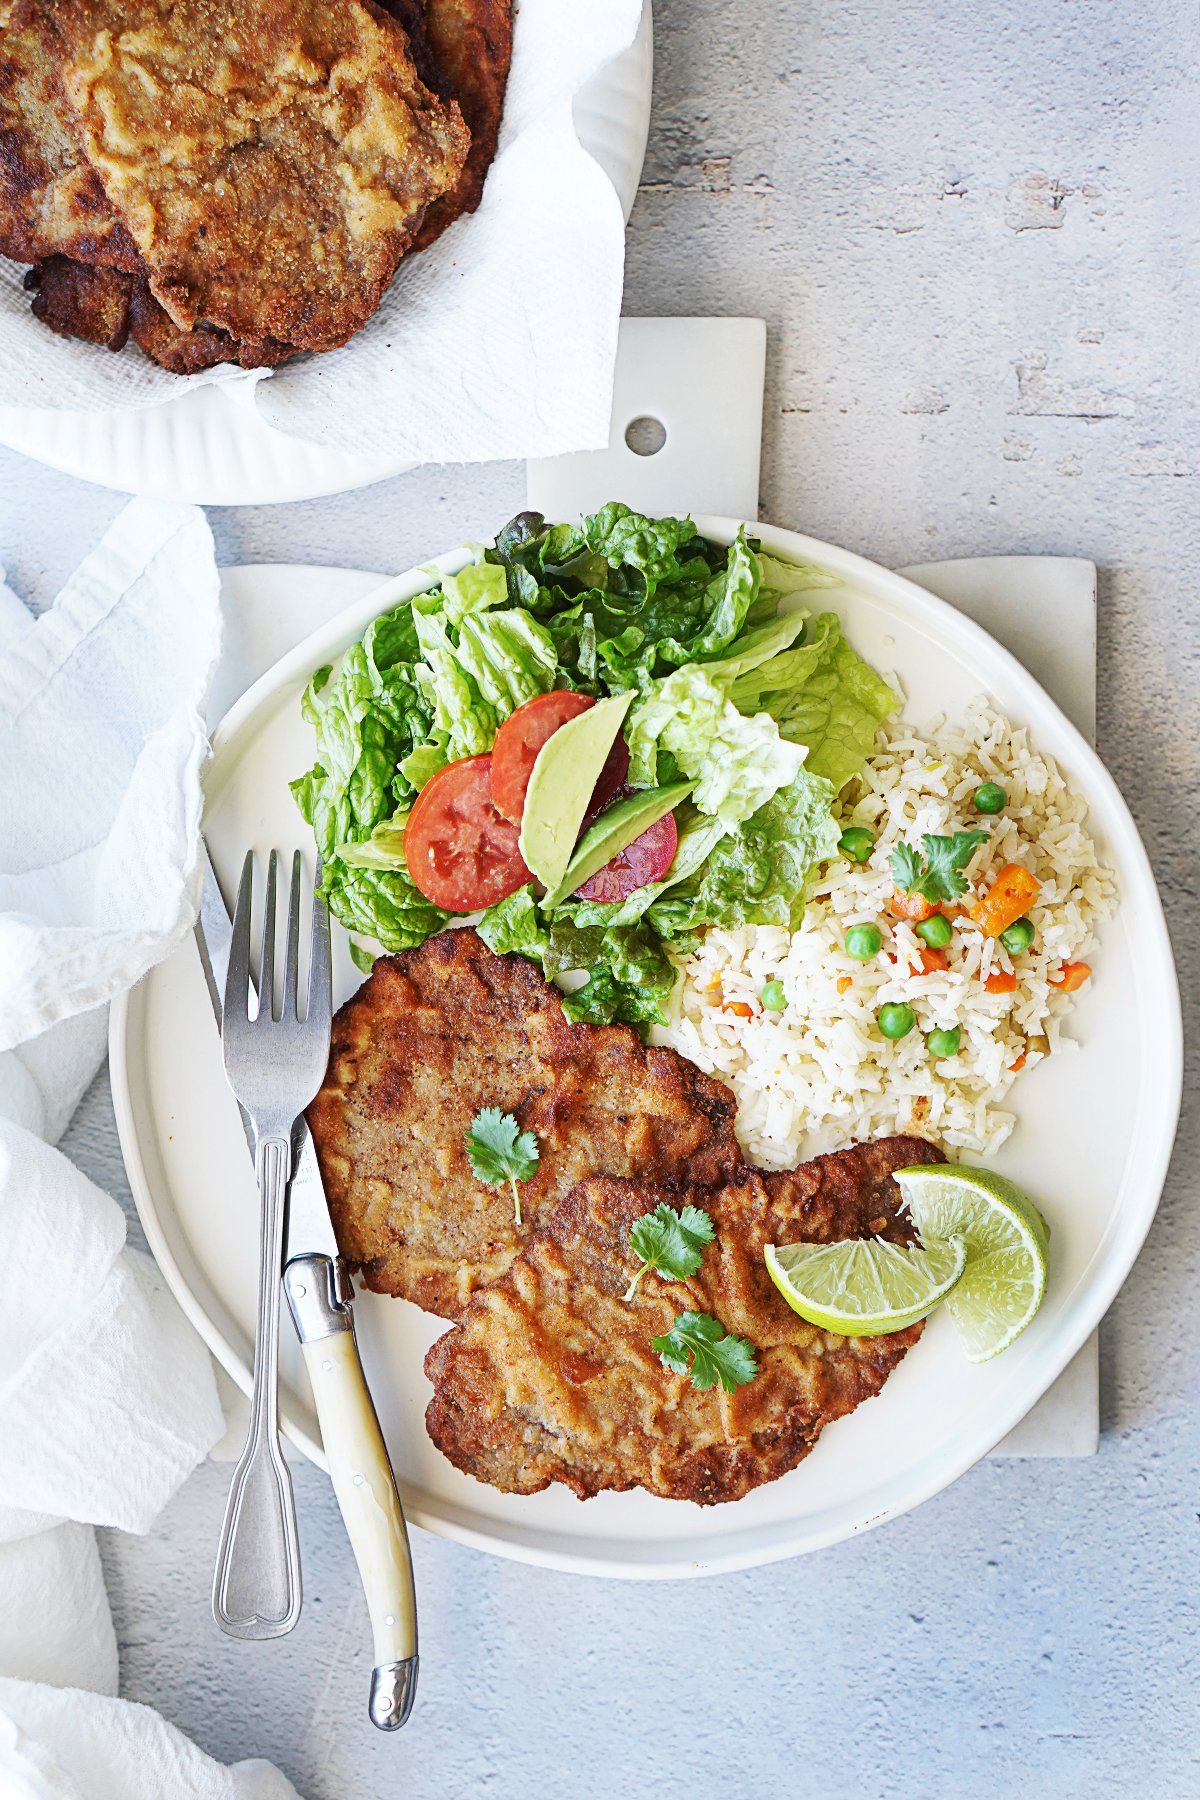 Milanesa on a plate with salad and rice on the side